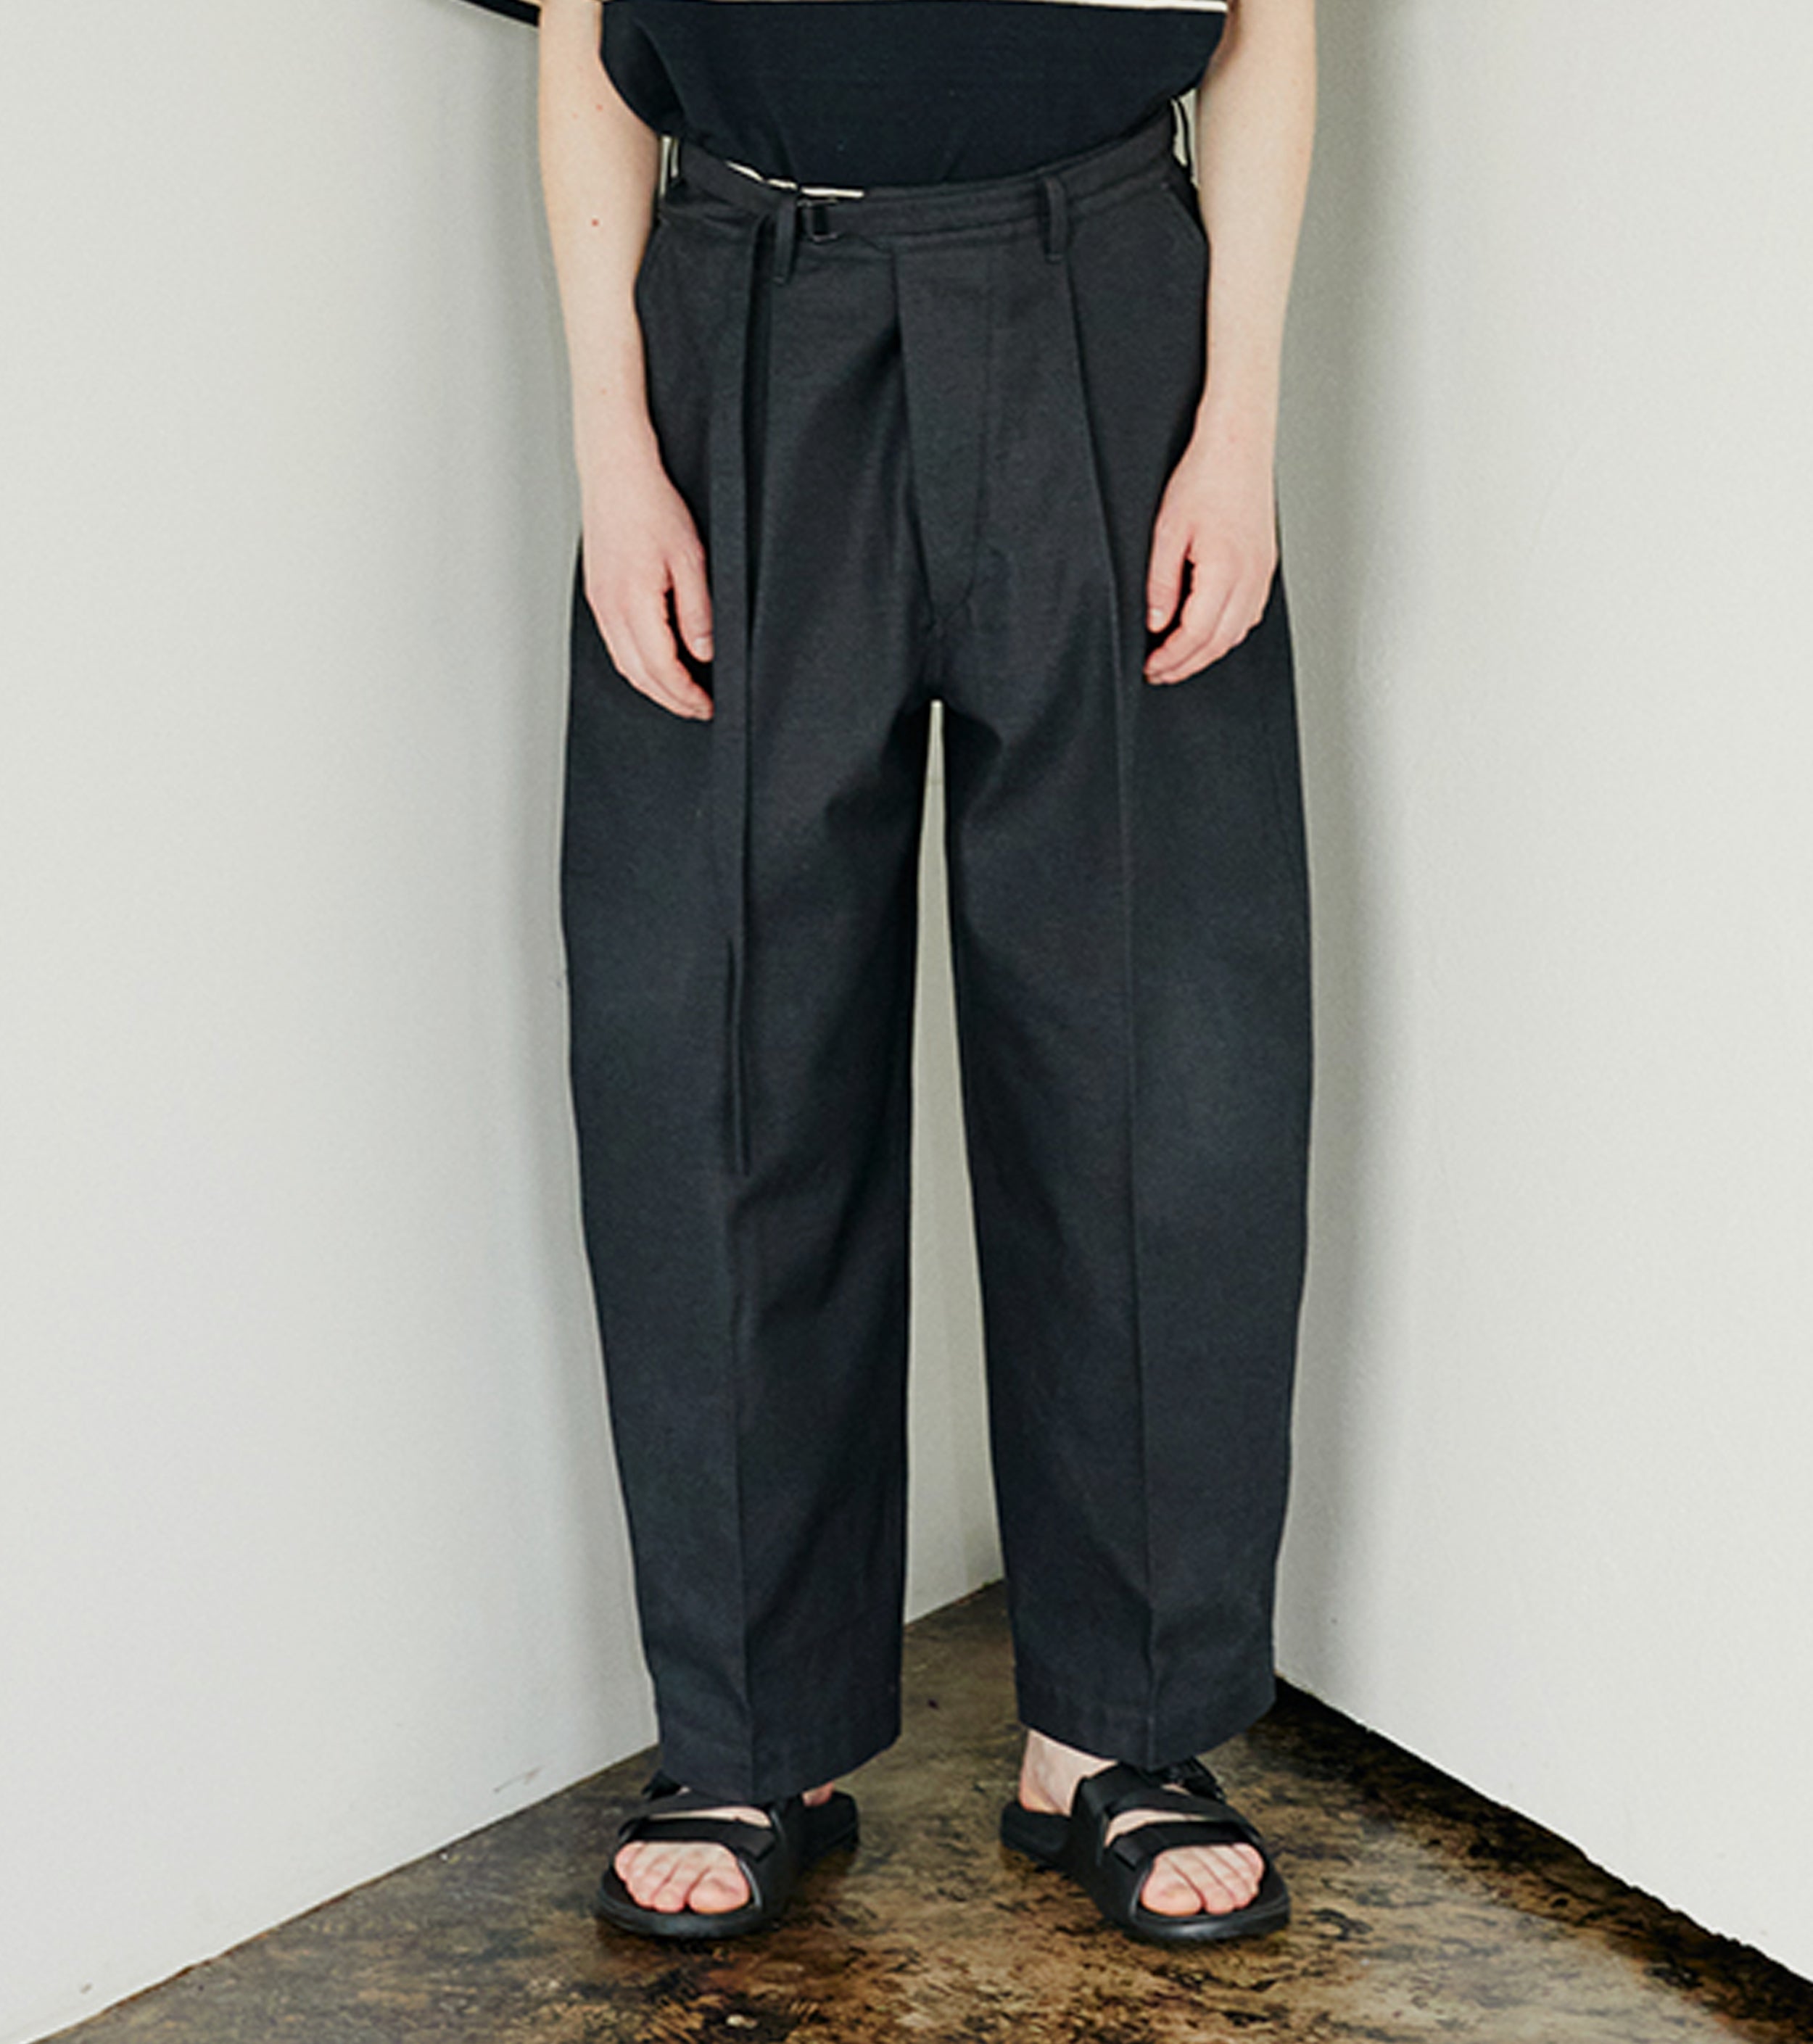  blurhms Drill Chambray Belted Trousers, Heather Charcoal